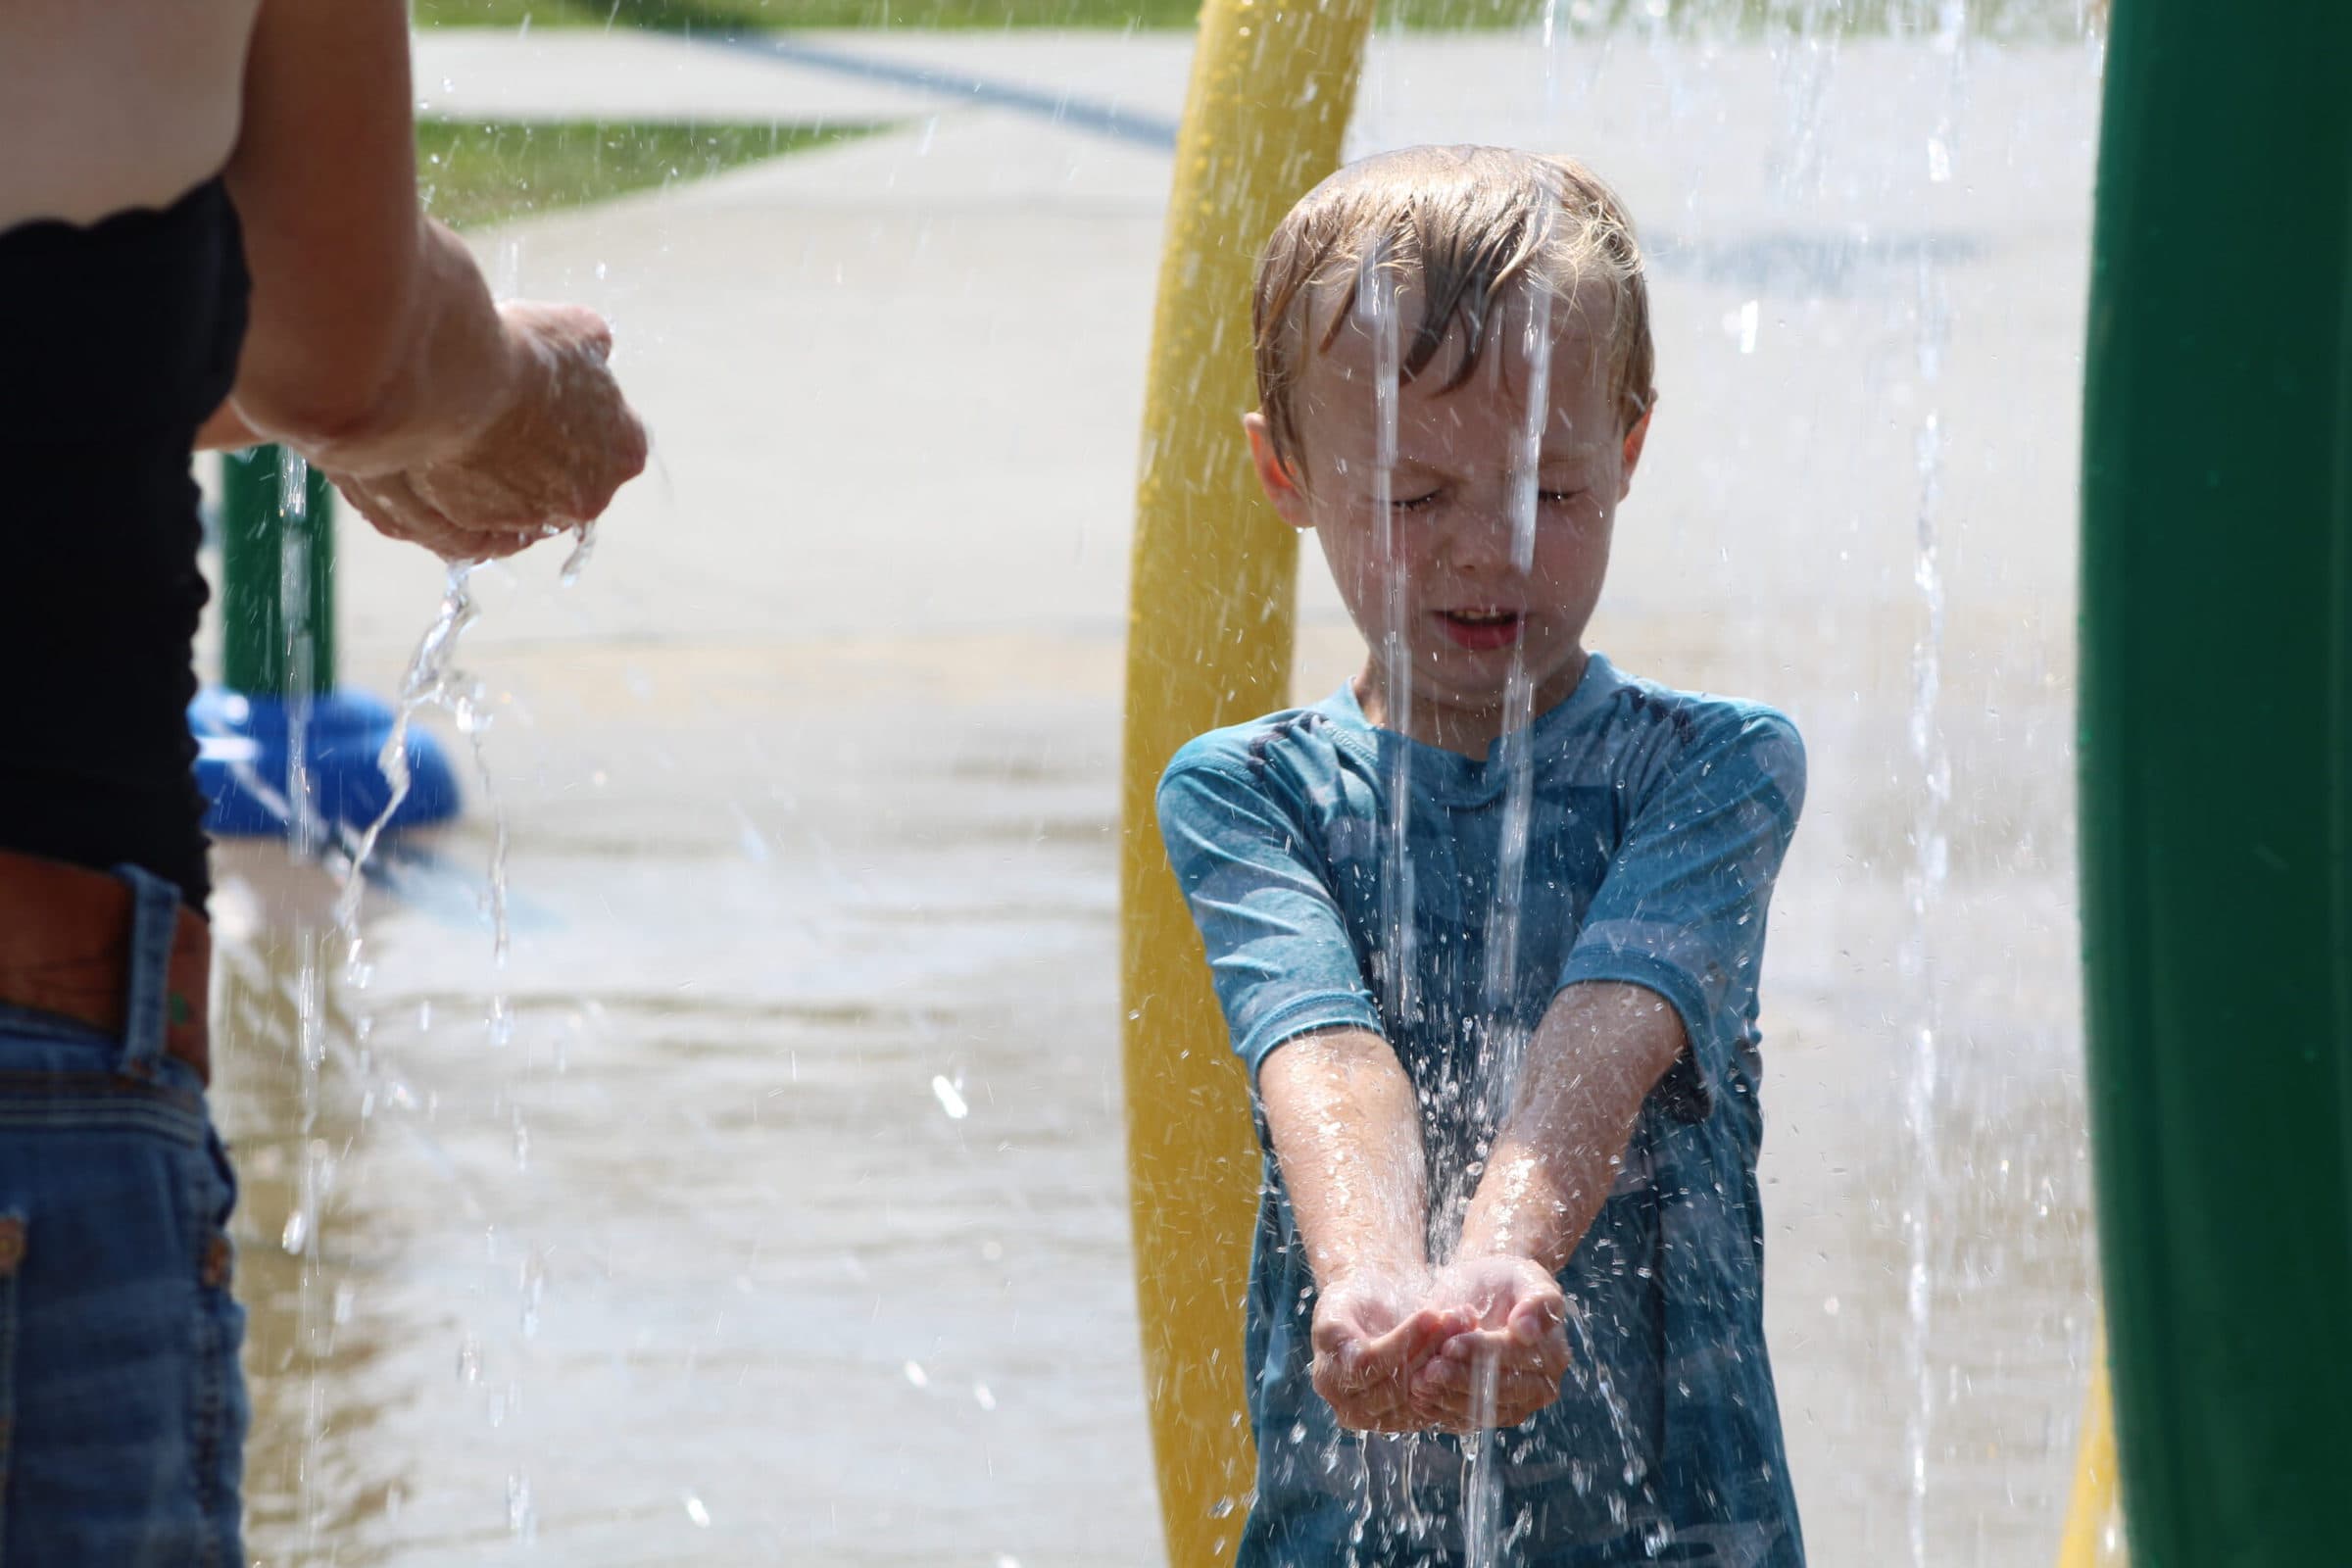 Ollie Robinson enjoys the water in the splash pad.